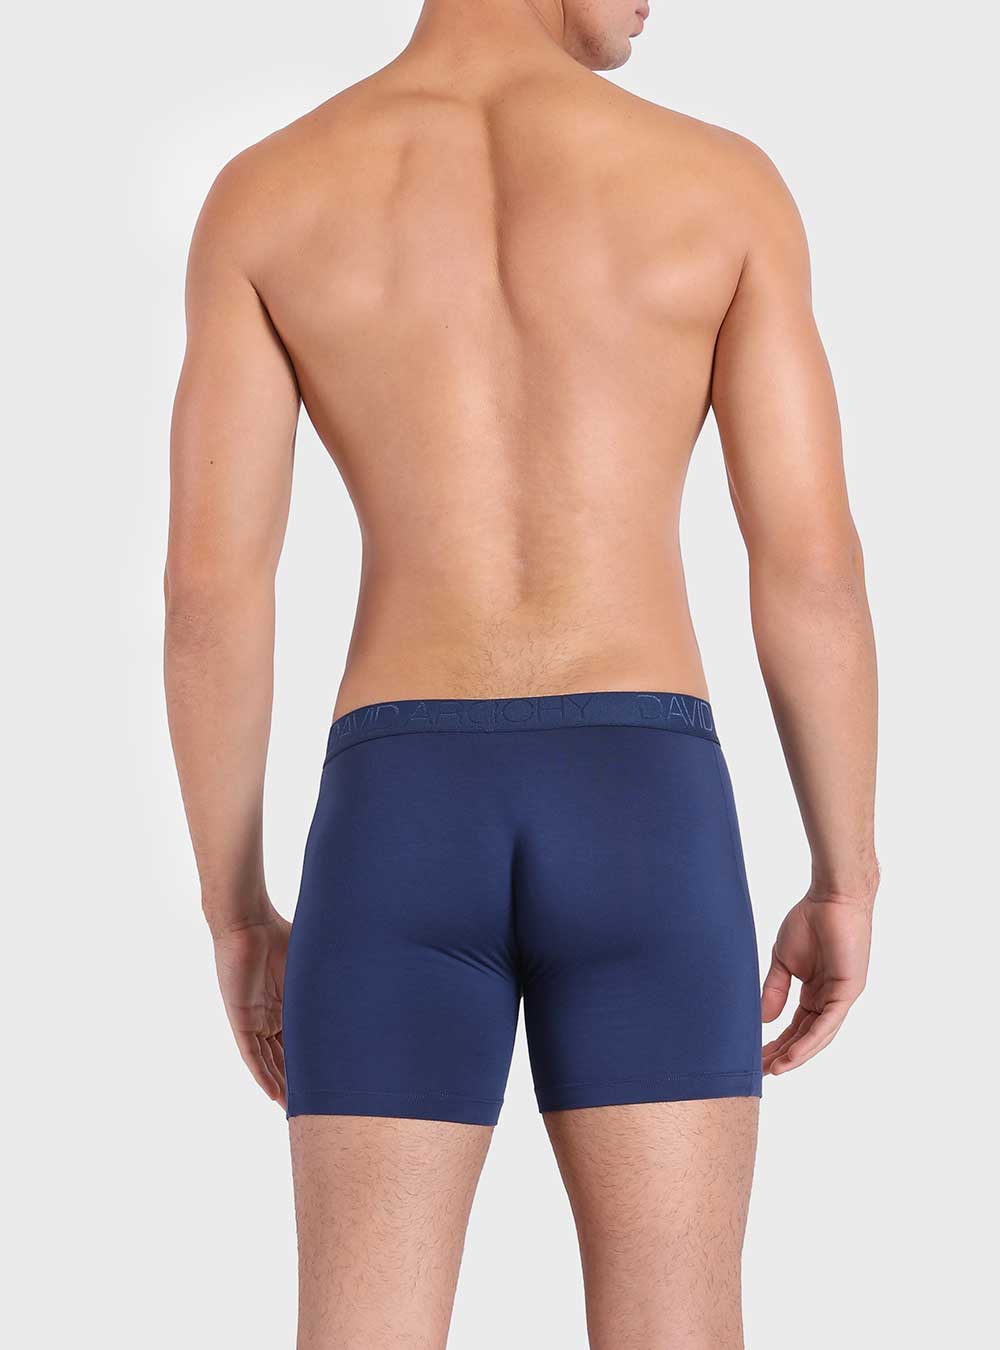 David Archy 4 Packs Trunks Bamboo Rayon Breathable Soft Underwear